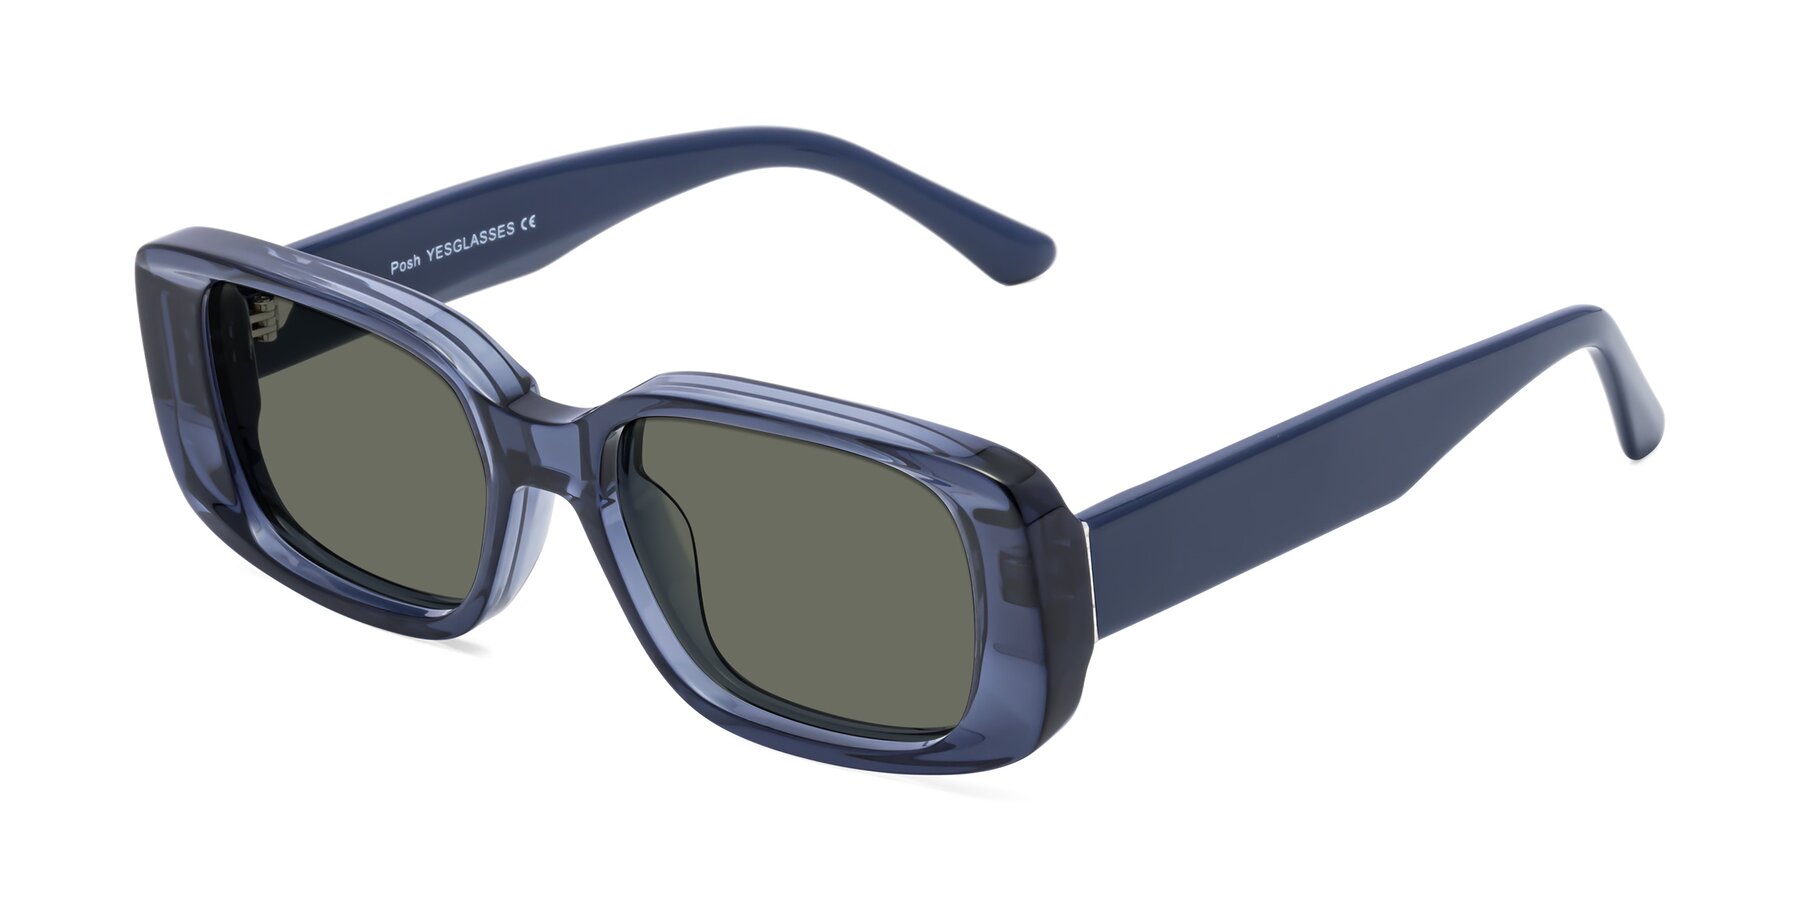 Angle of Posh in Translucent Blue with Gray Polarized Lenses